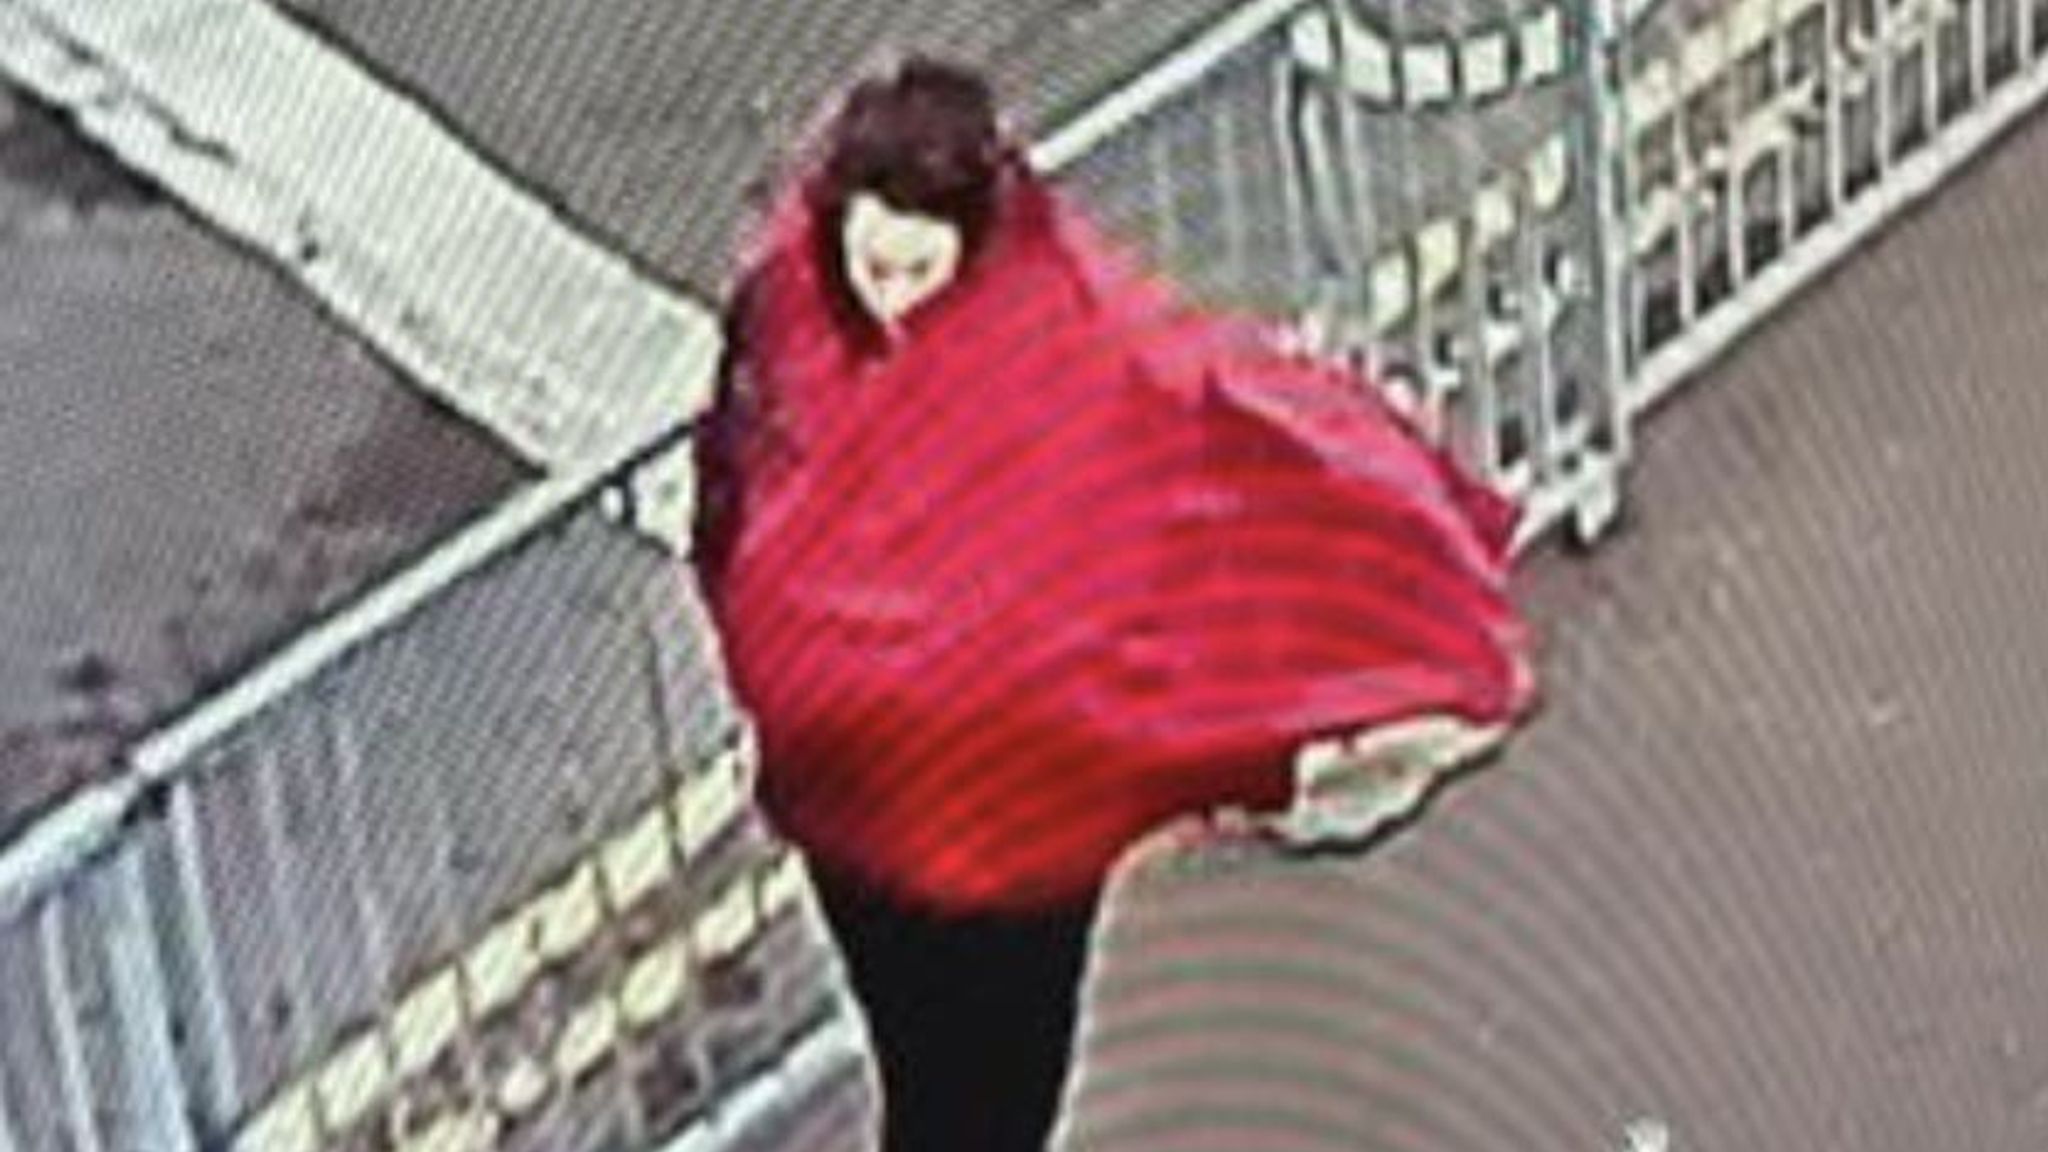 Police released a CCTV image of a woman believed to be Constance Marten